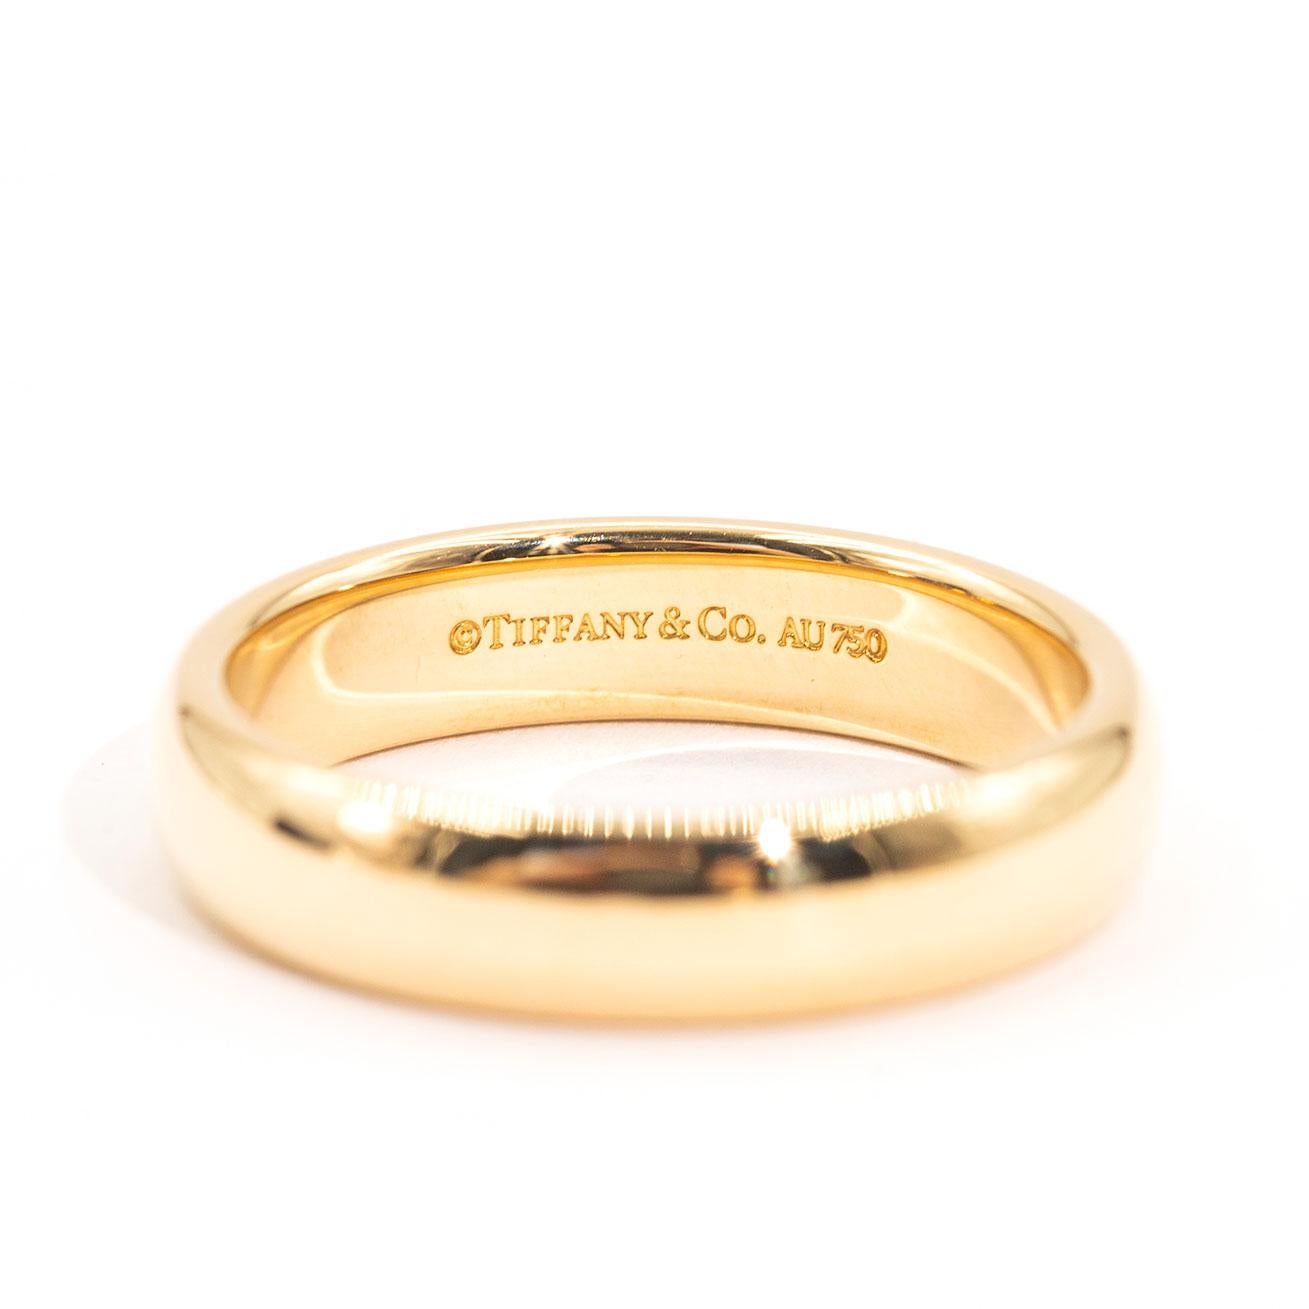 Crafted in 18 carat yellow gold is this vintage Tiffany & Co Tiffany Classic Wedding Band Ring. The Tiffany & Co Tiffany Classic Wedding Band Ring measures 4.5 millimetres and 1.85 millimetres in thickness. The Tiffany & Co Tiffany Classic Wedding